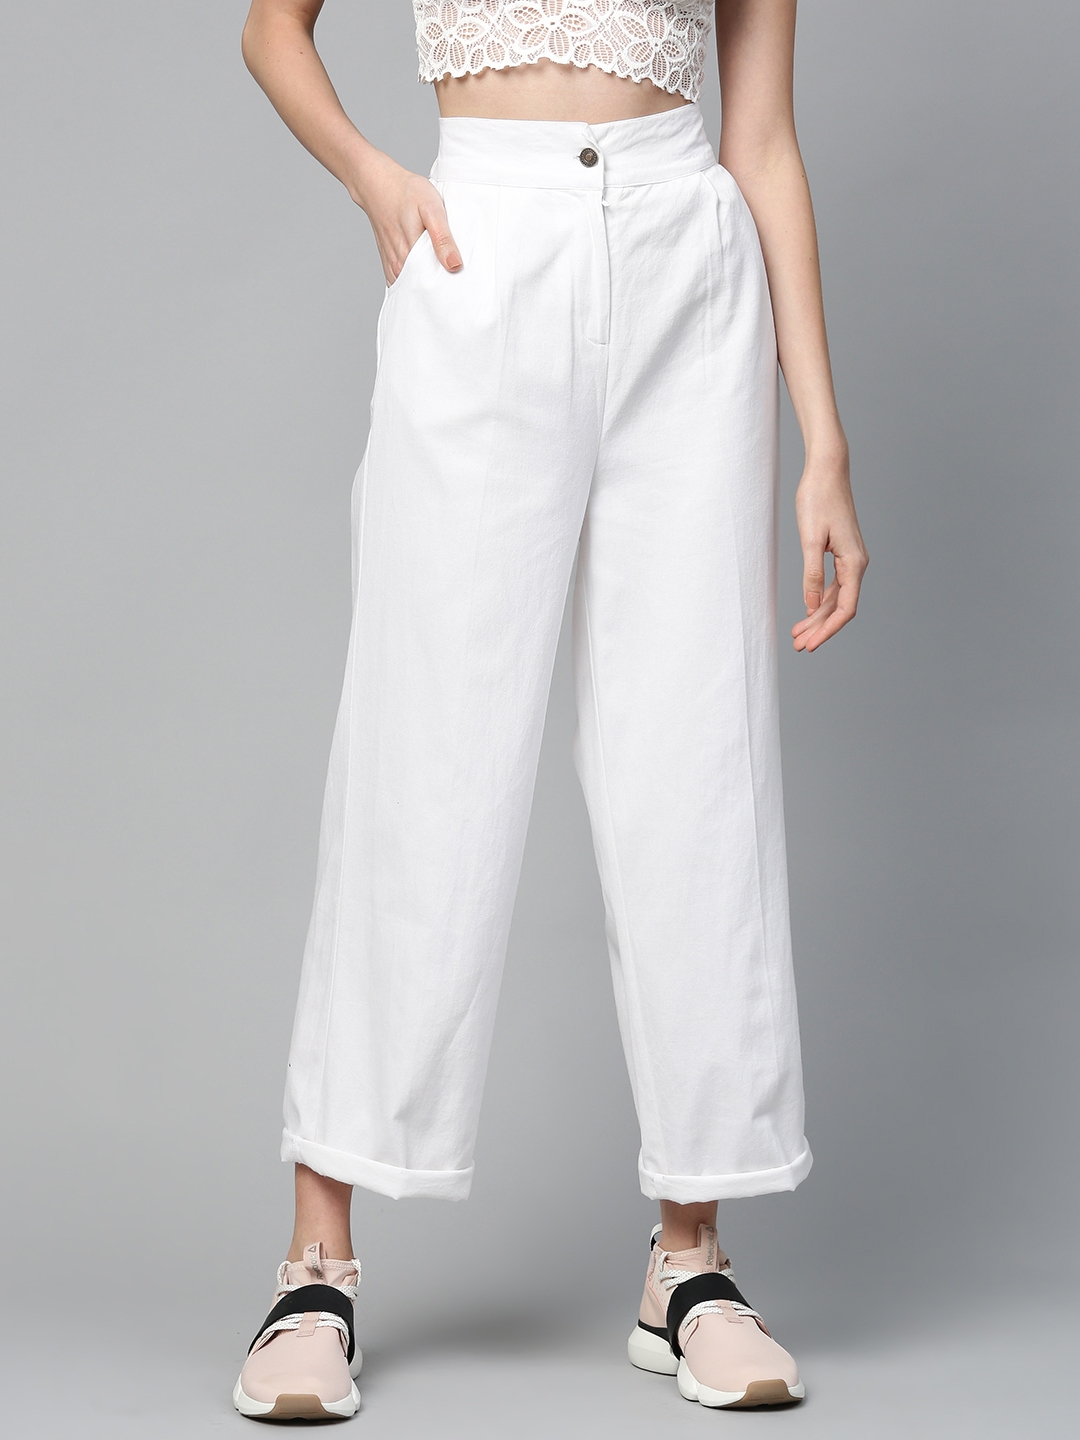 Discover more than 165 white pants for women super hot